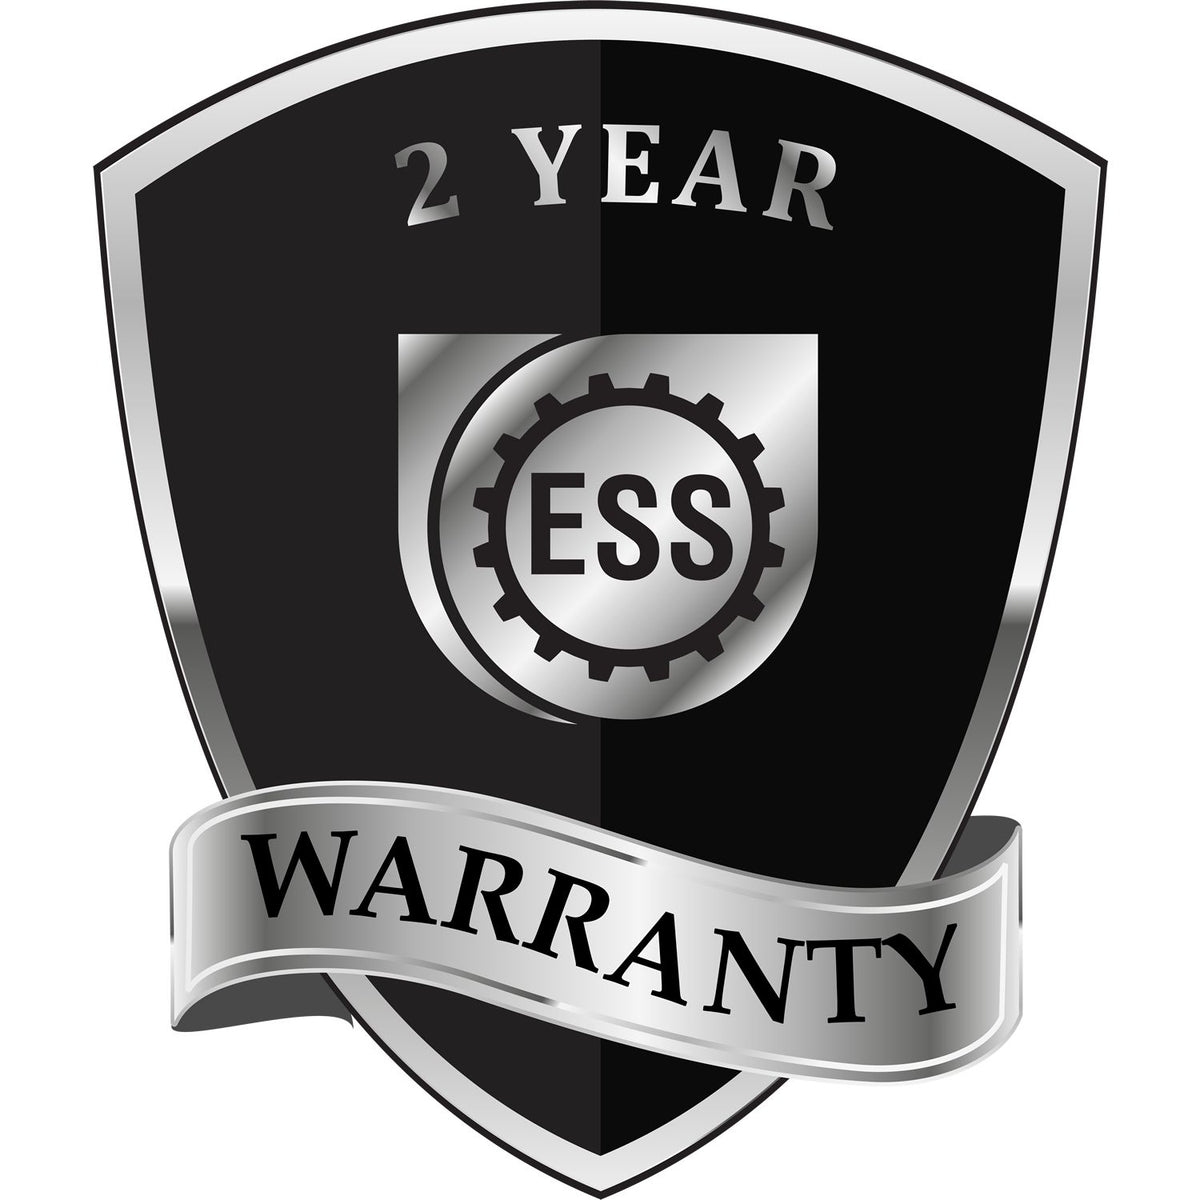 A black and silver badge or emblem showing warranty information for the Hybrid Colorado Geologist Seal